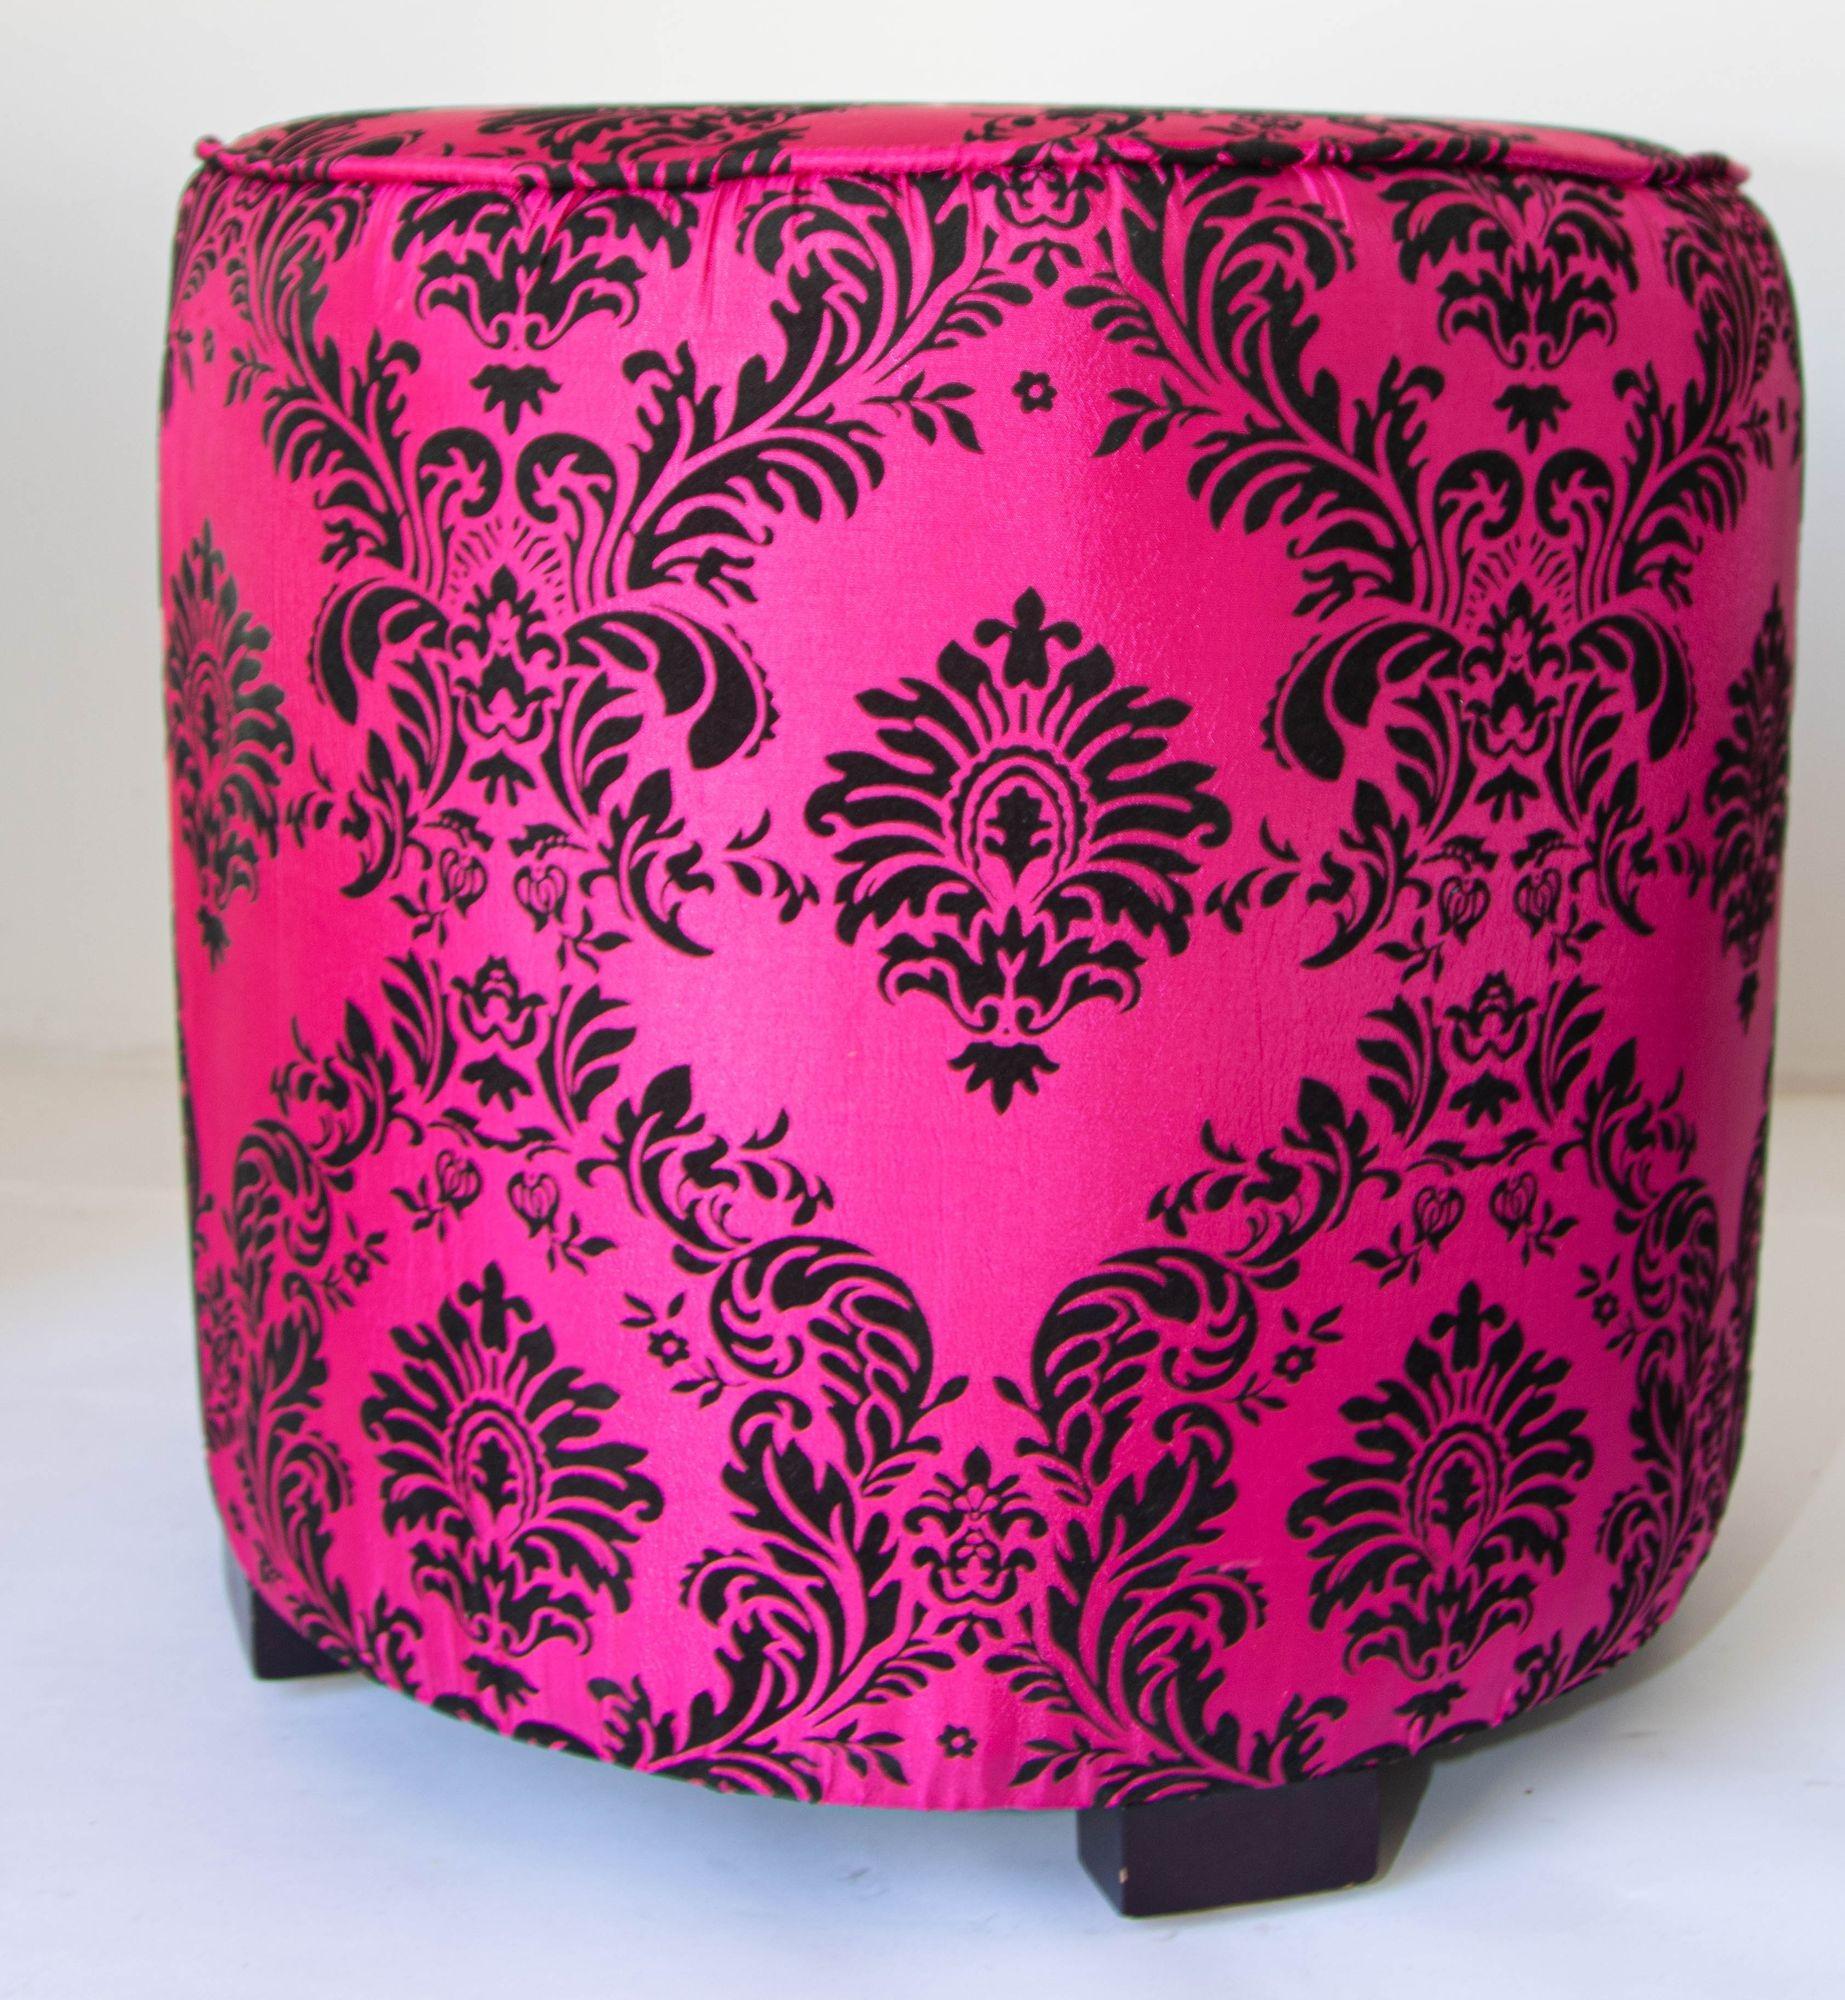 Fabric Vintage Fuchsia and Black Moroccan Round Upholstered Stools For Sale